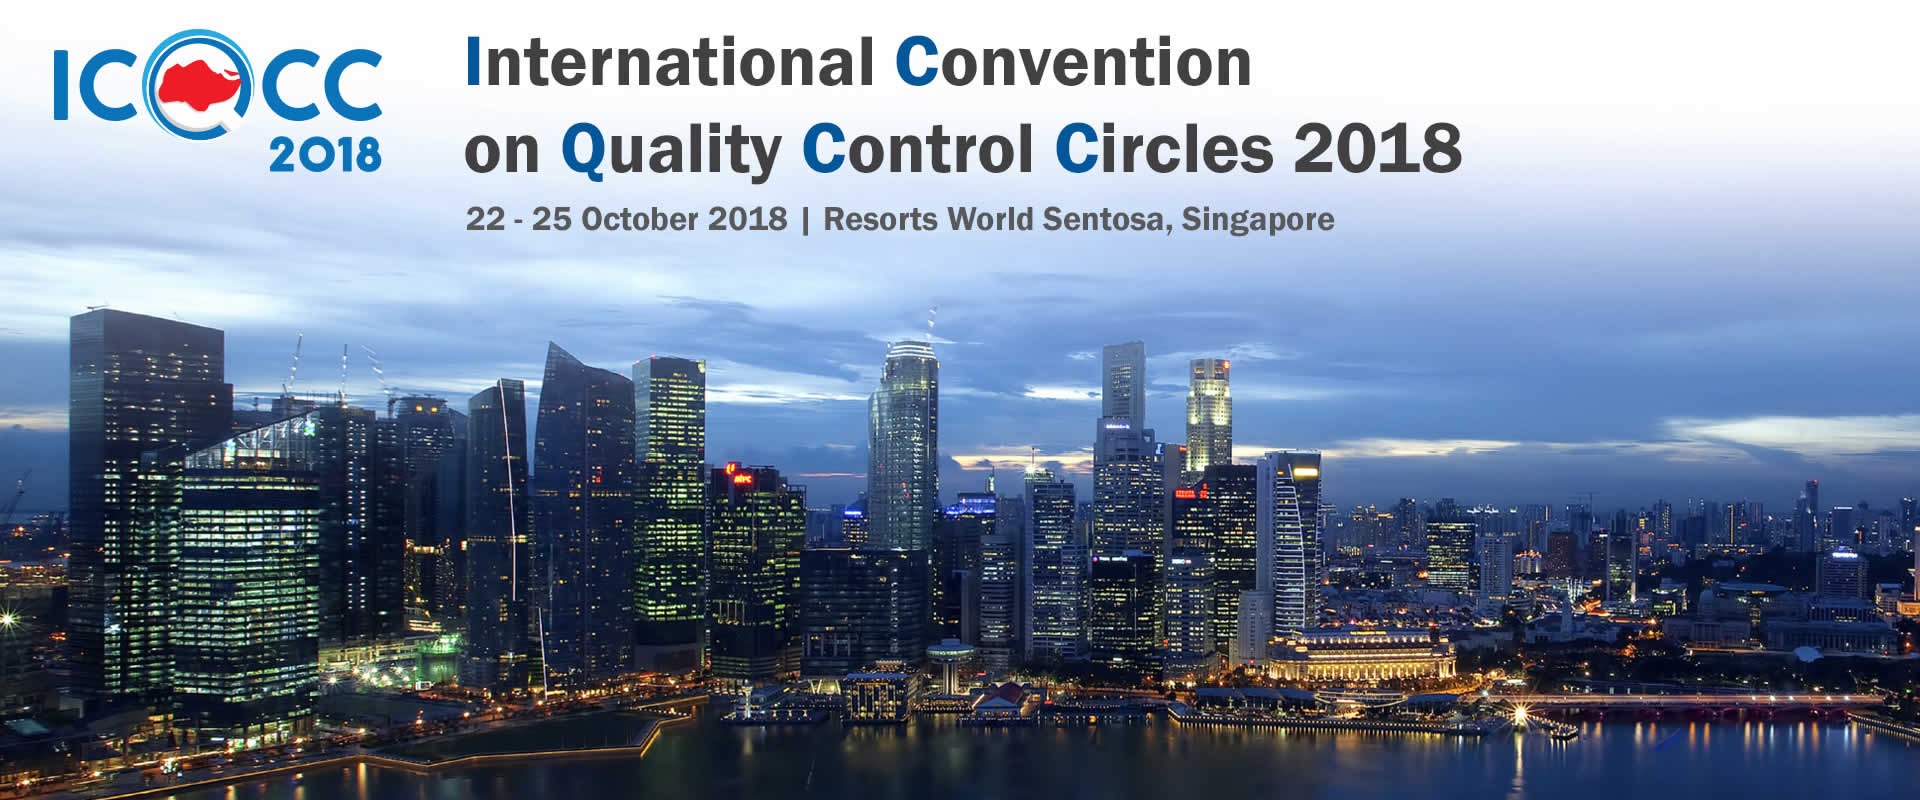 Six grand winners to fly to Singapore for ICQCC 2018 in October